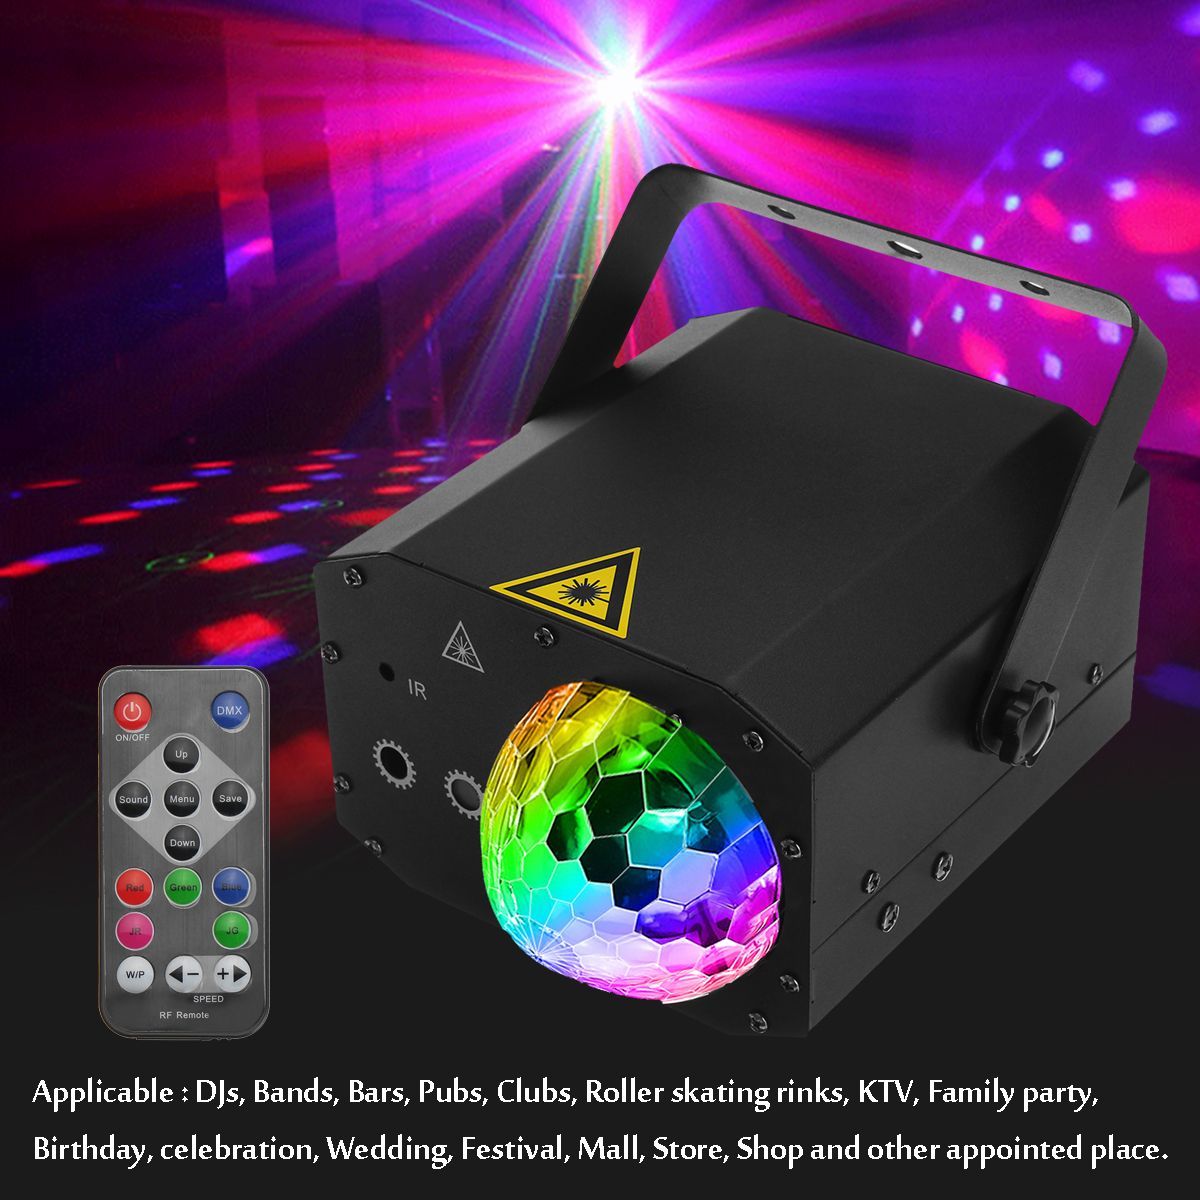 Mini-Magic-Ball-Laser-Party-Light-Sound-Active-Strobe-Lamp-with-Remote-for-KTV-Party-DJ-Birthday-1660265